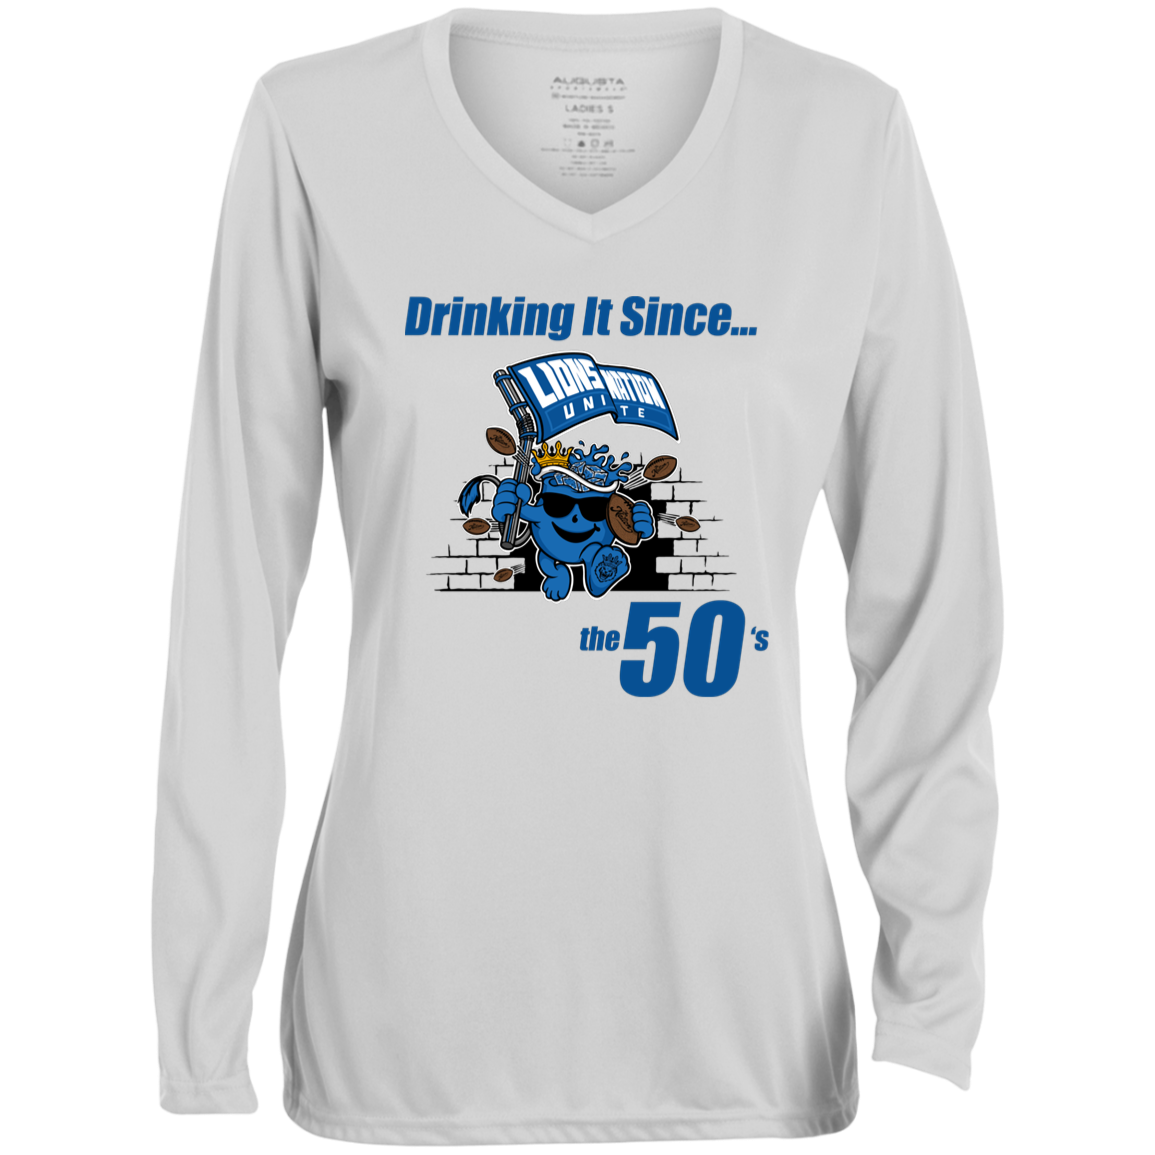 Drinking It Since the 50's Women's Long-Sleeved T-Shirt